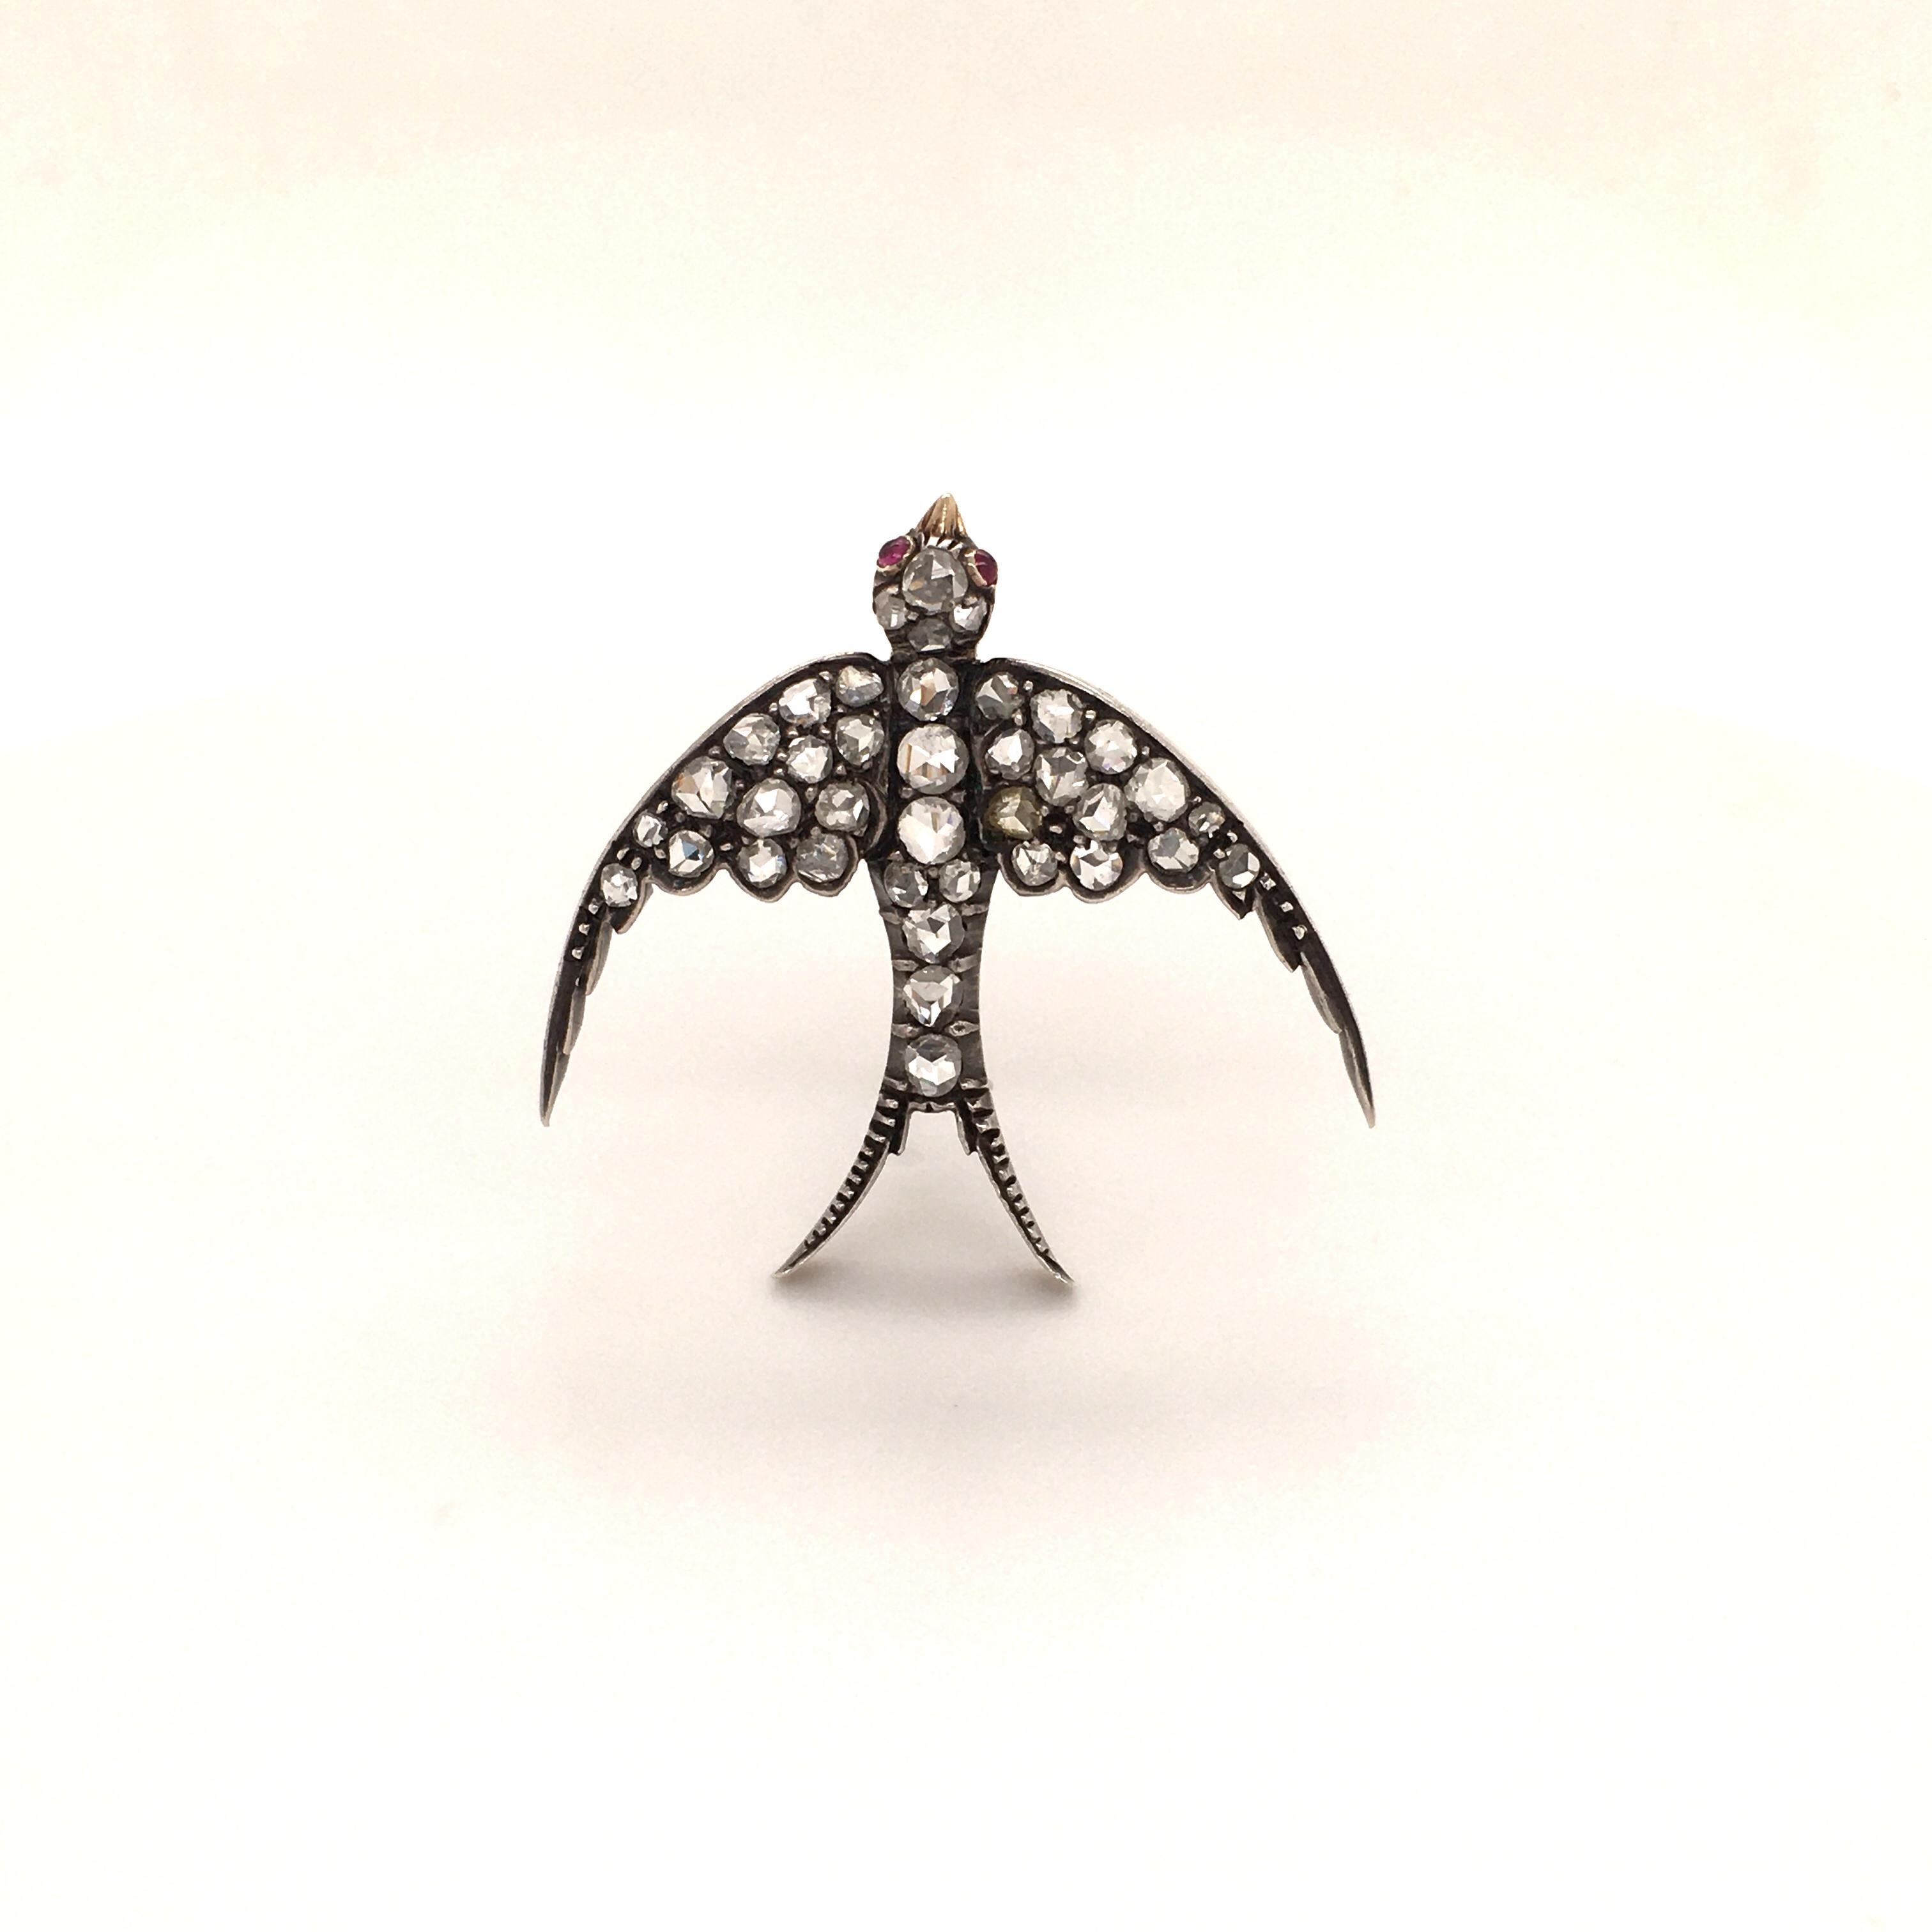 This marvelous Victorian swallow bird brooch is set with 38 rose cut diamonds, total weight approximately 0.76 carats. Two small ruby cabochons mark the eyes.
Superbly handcrafted in silver over 14 karat rose gold. Very fine condition.